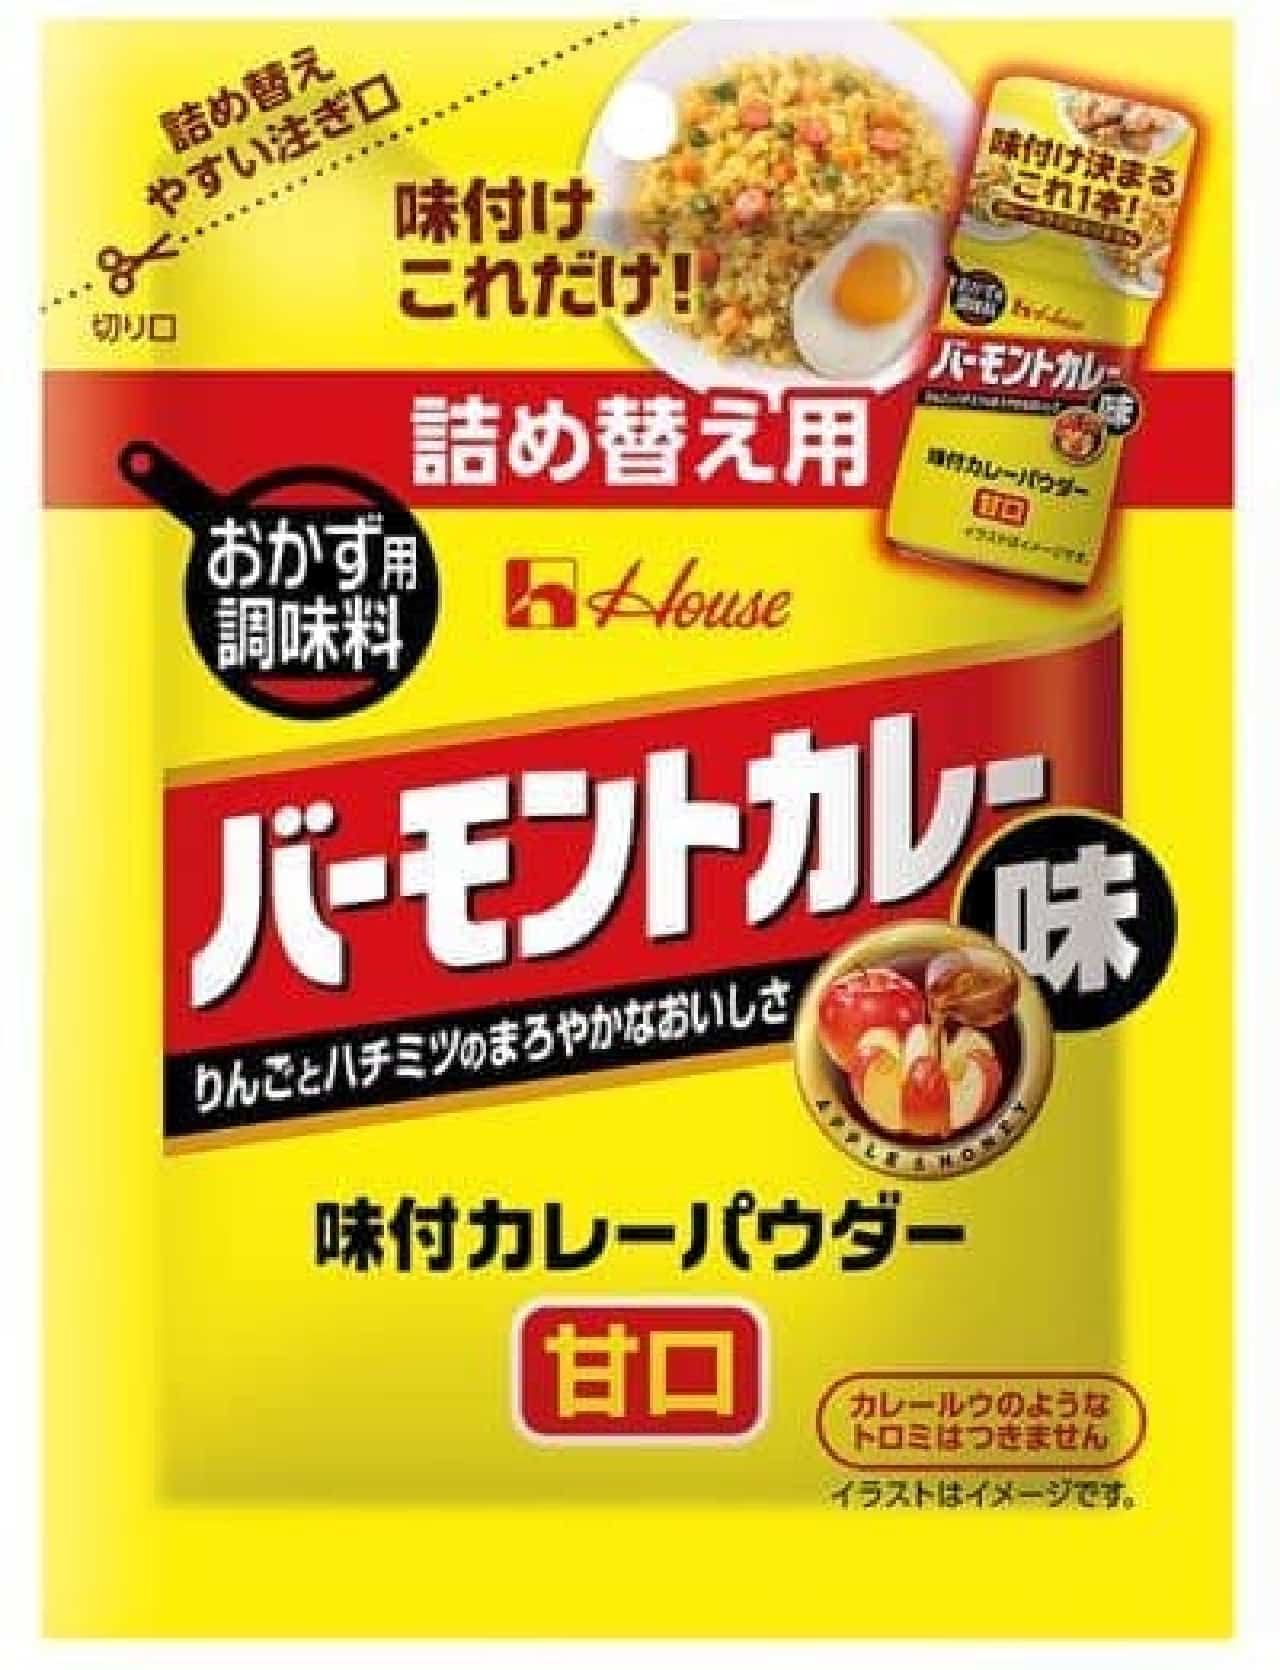 House food "seasoned curry powder Vermont curry taste sweet"